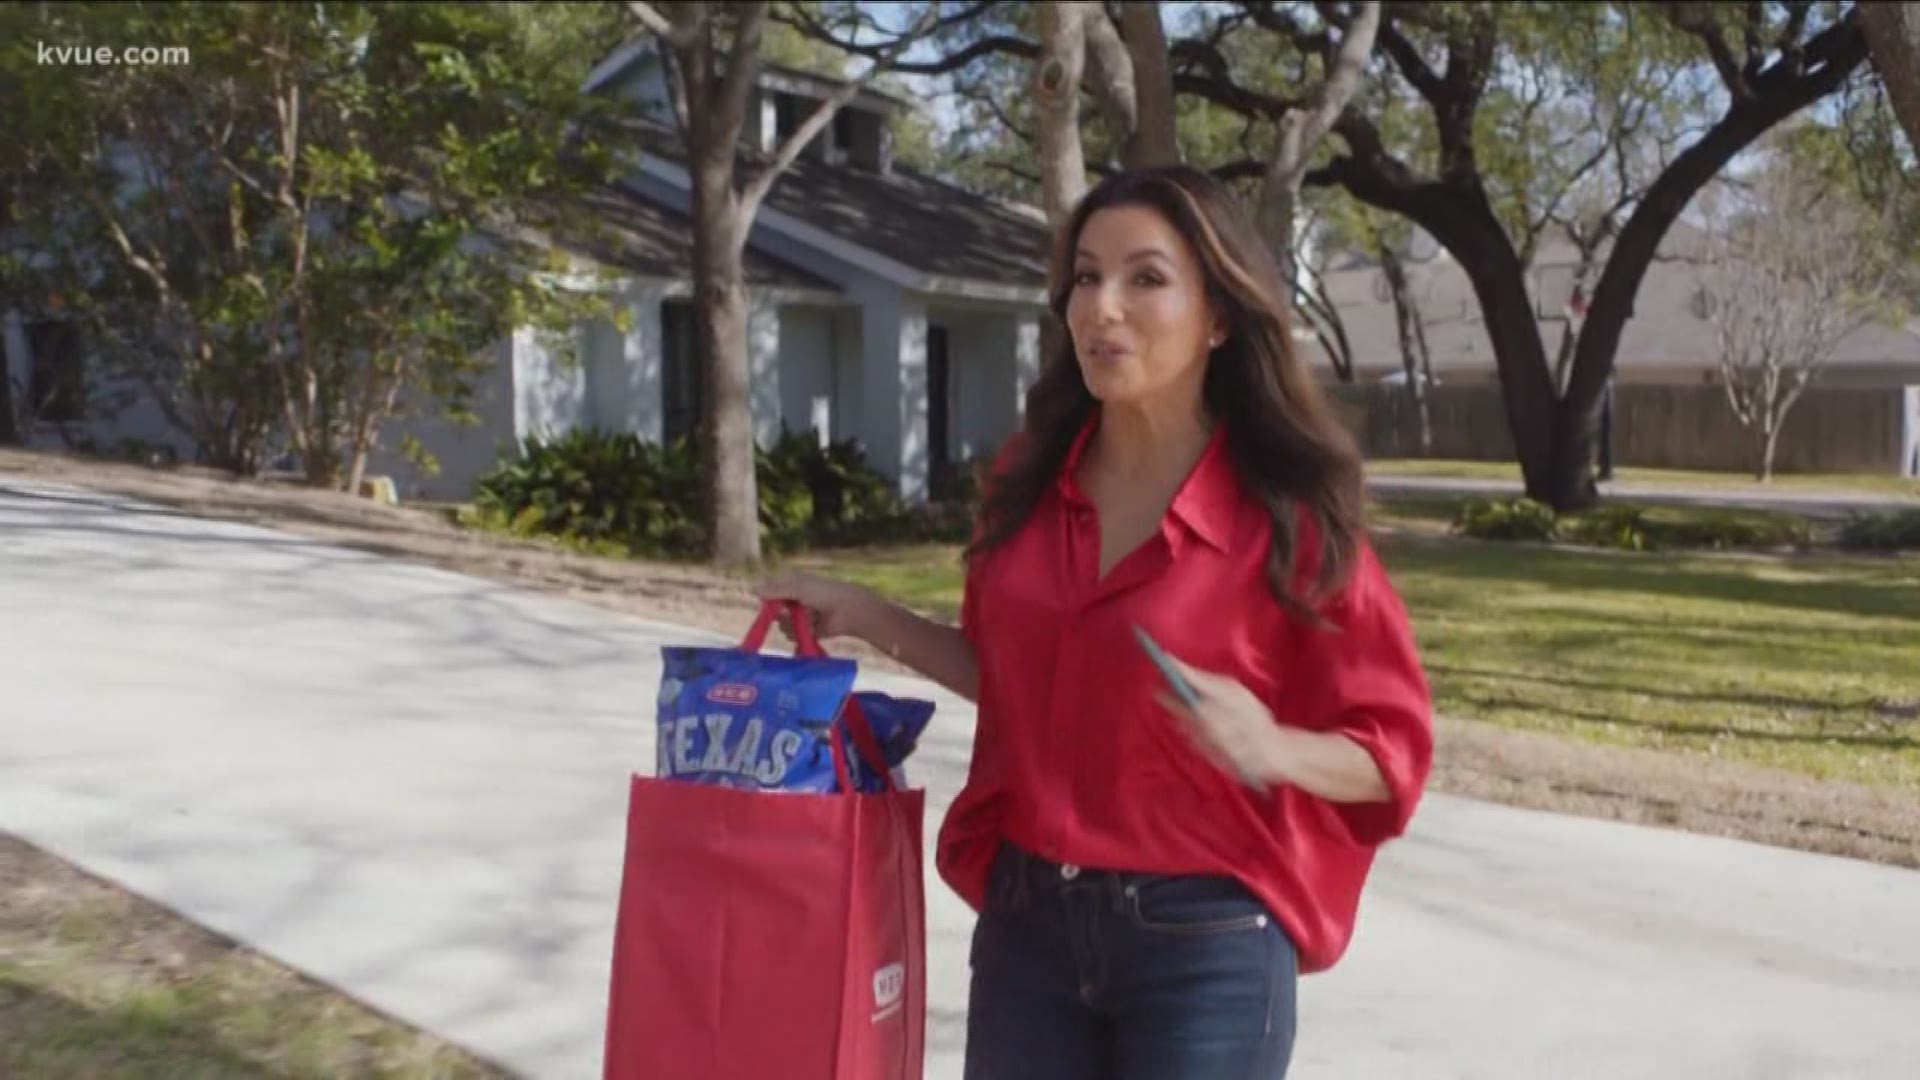 HEB commercial to air on Super Bowl Sunday